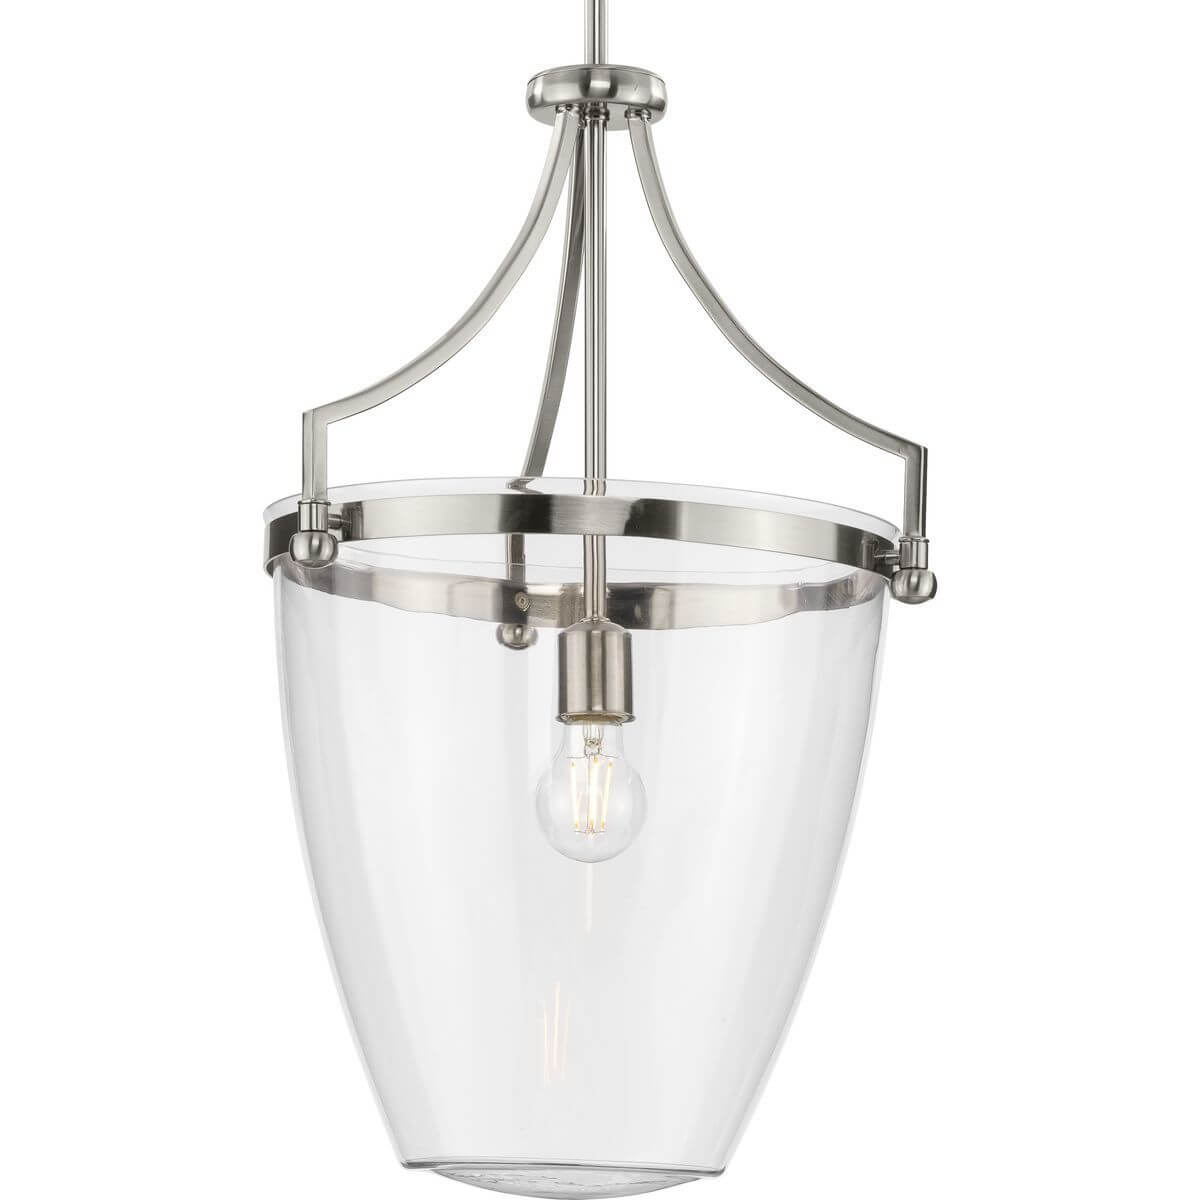 Progress Lighting Parkhurst 1 Light 15 inch Pendant in Brushed Nickel with Clear Glass P500361-009